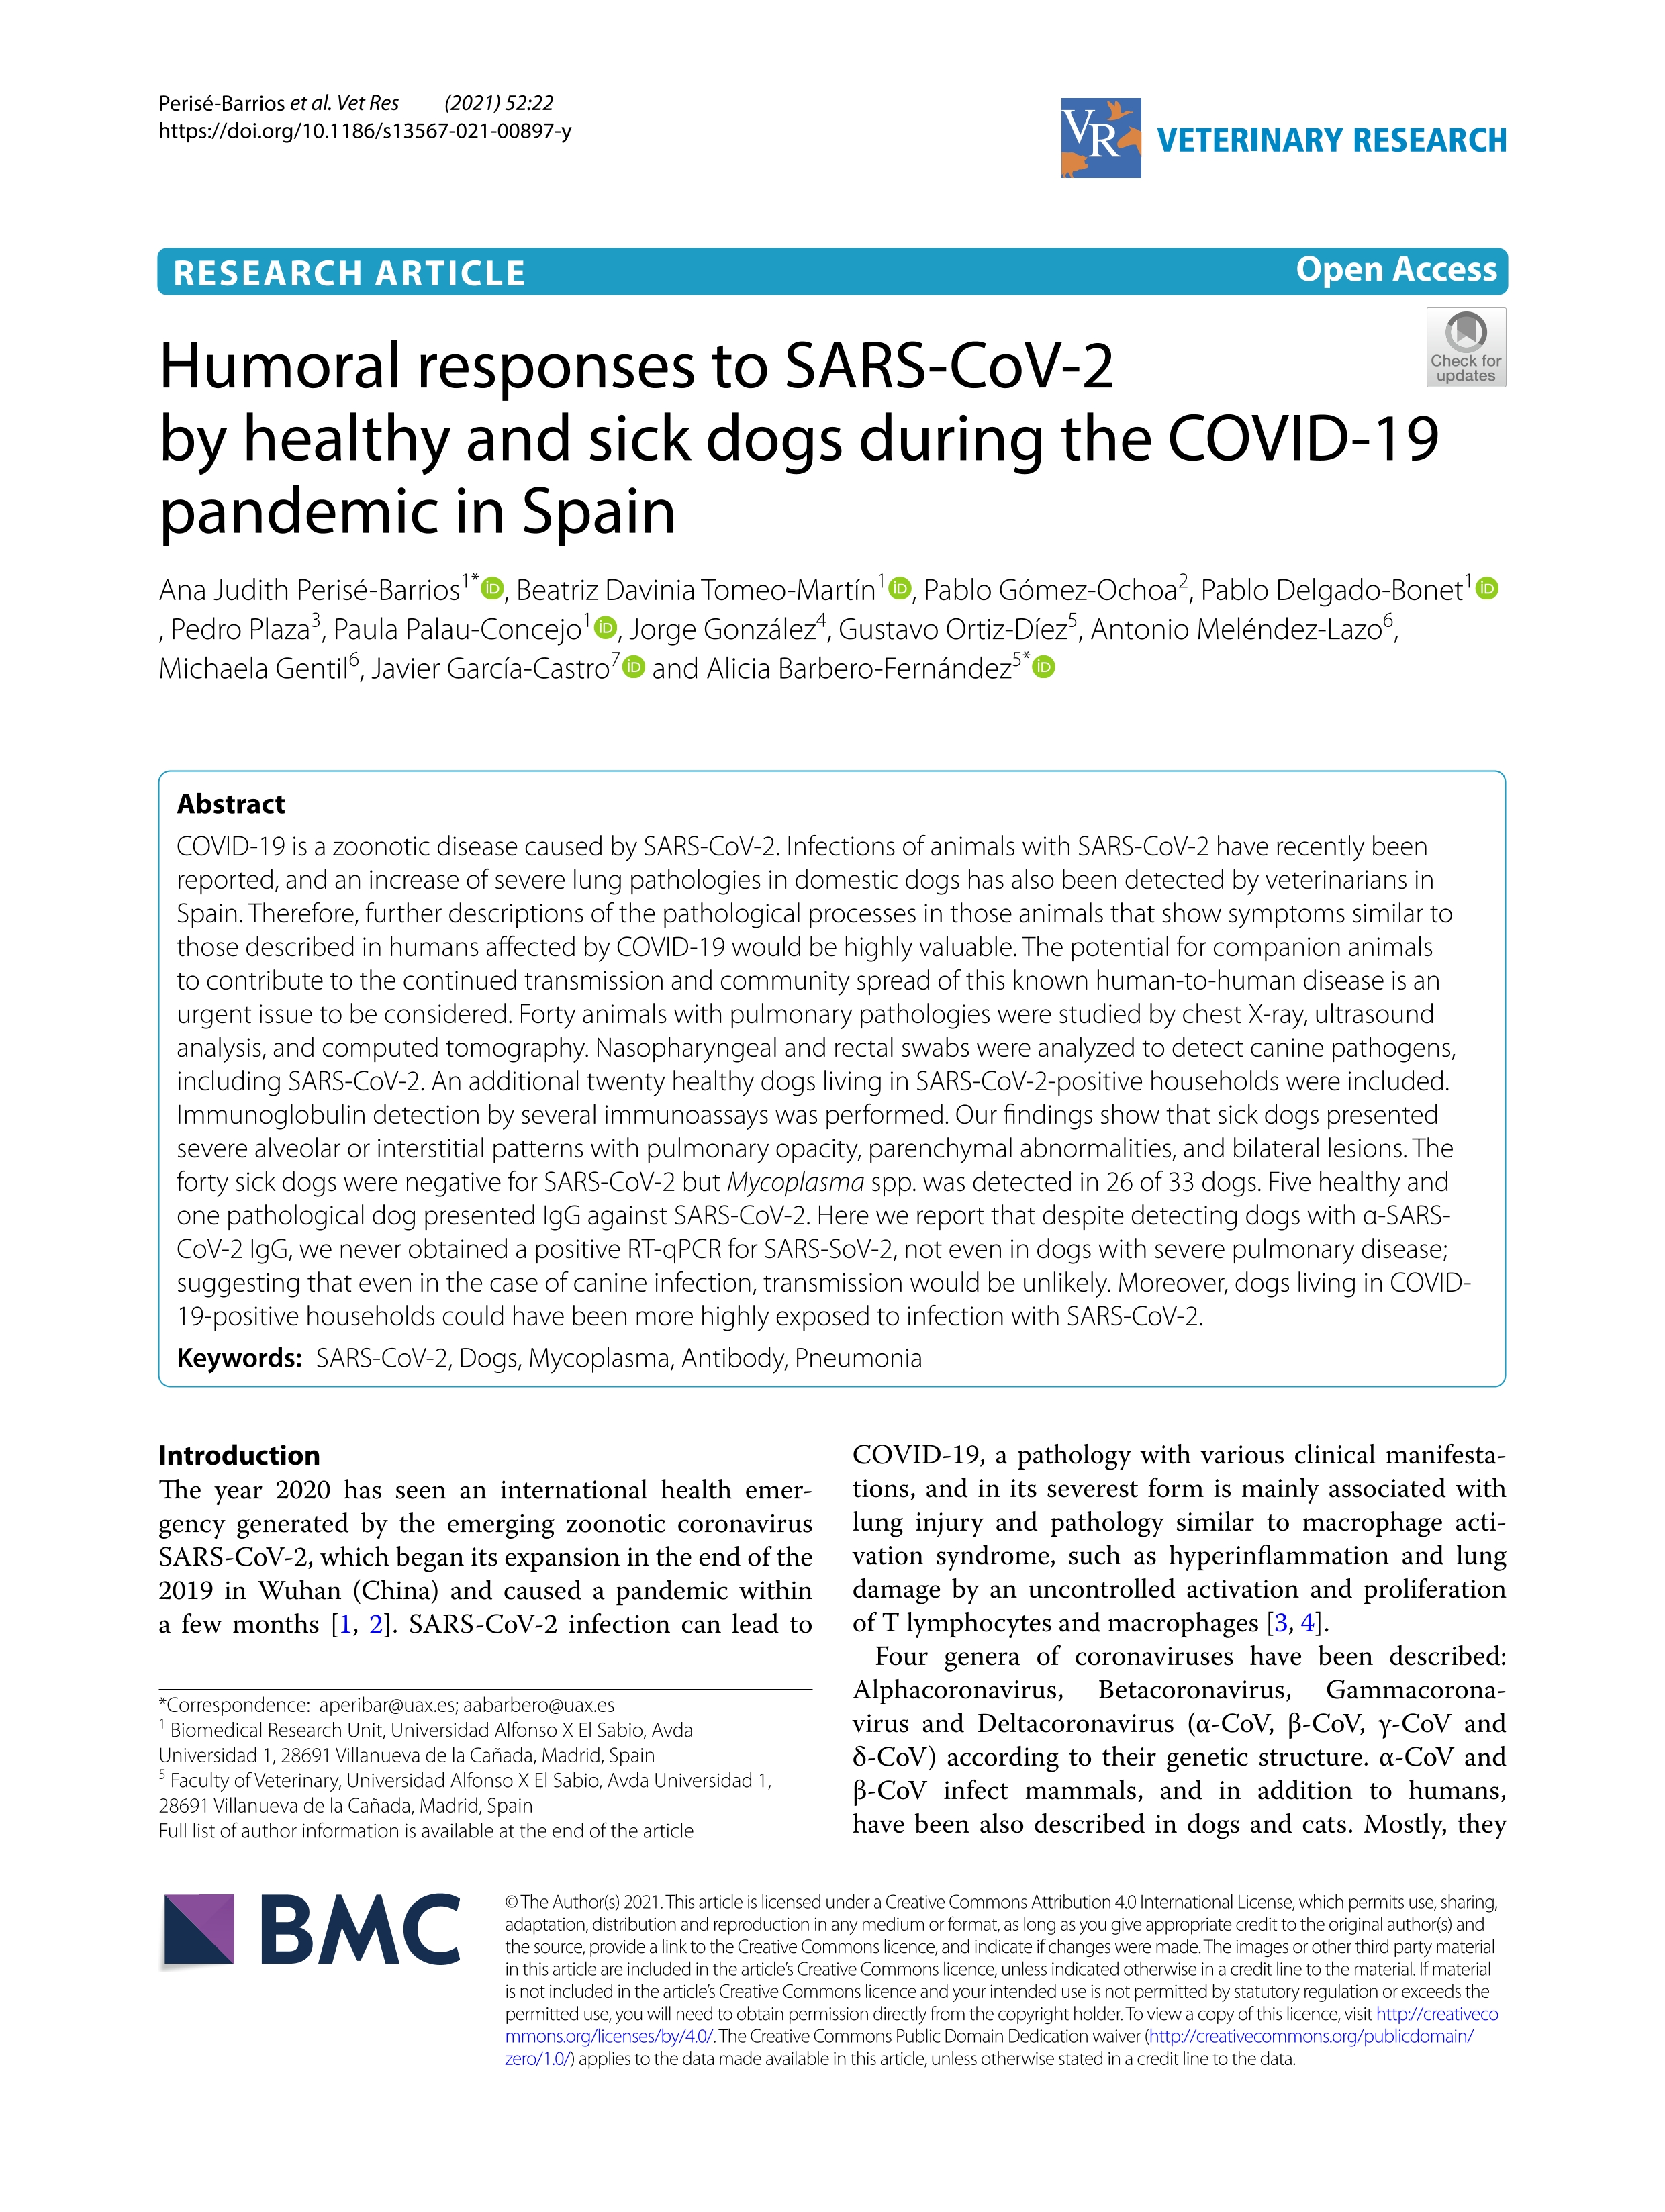 Humoral responses to SARS-CoV-2 by healthy and sick dogs during the COVID-19 pandemic in Spain